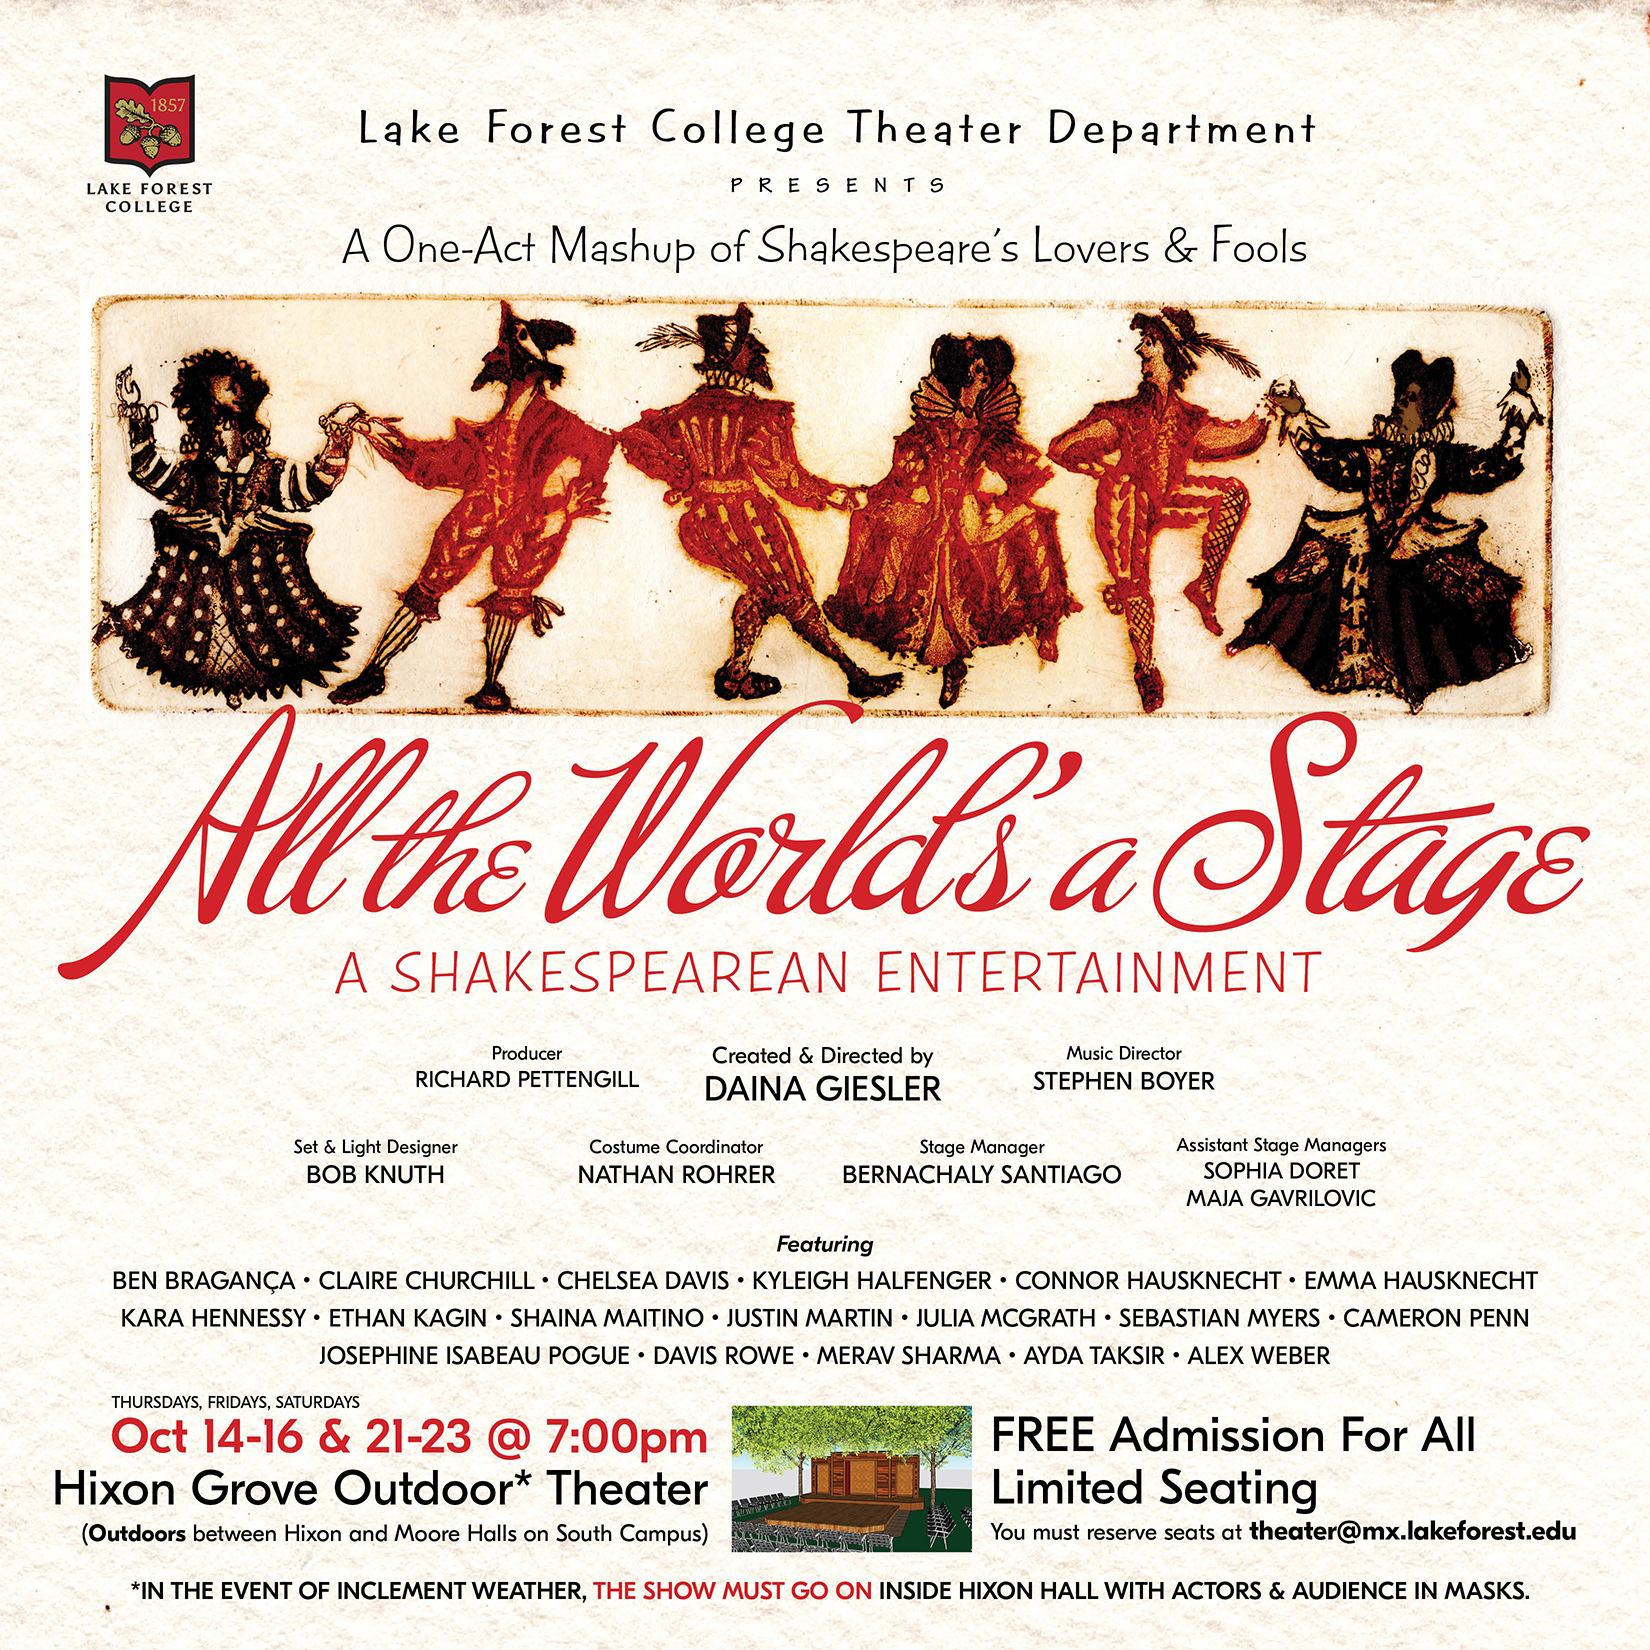 All the world's a stage poster